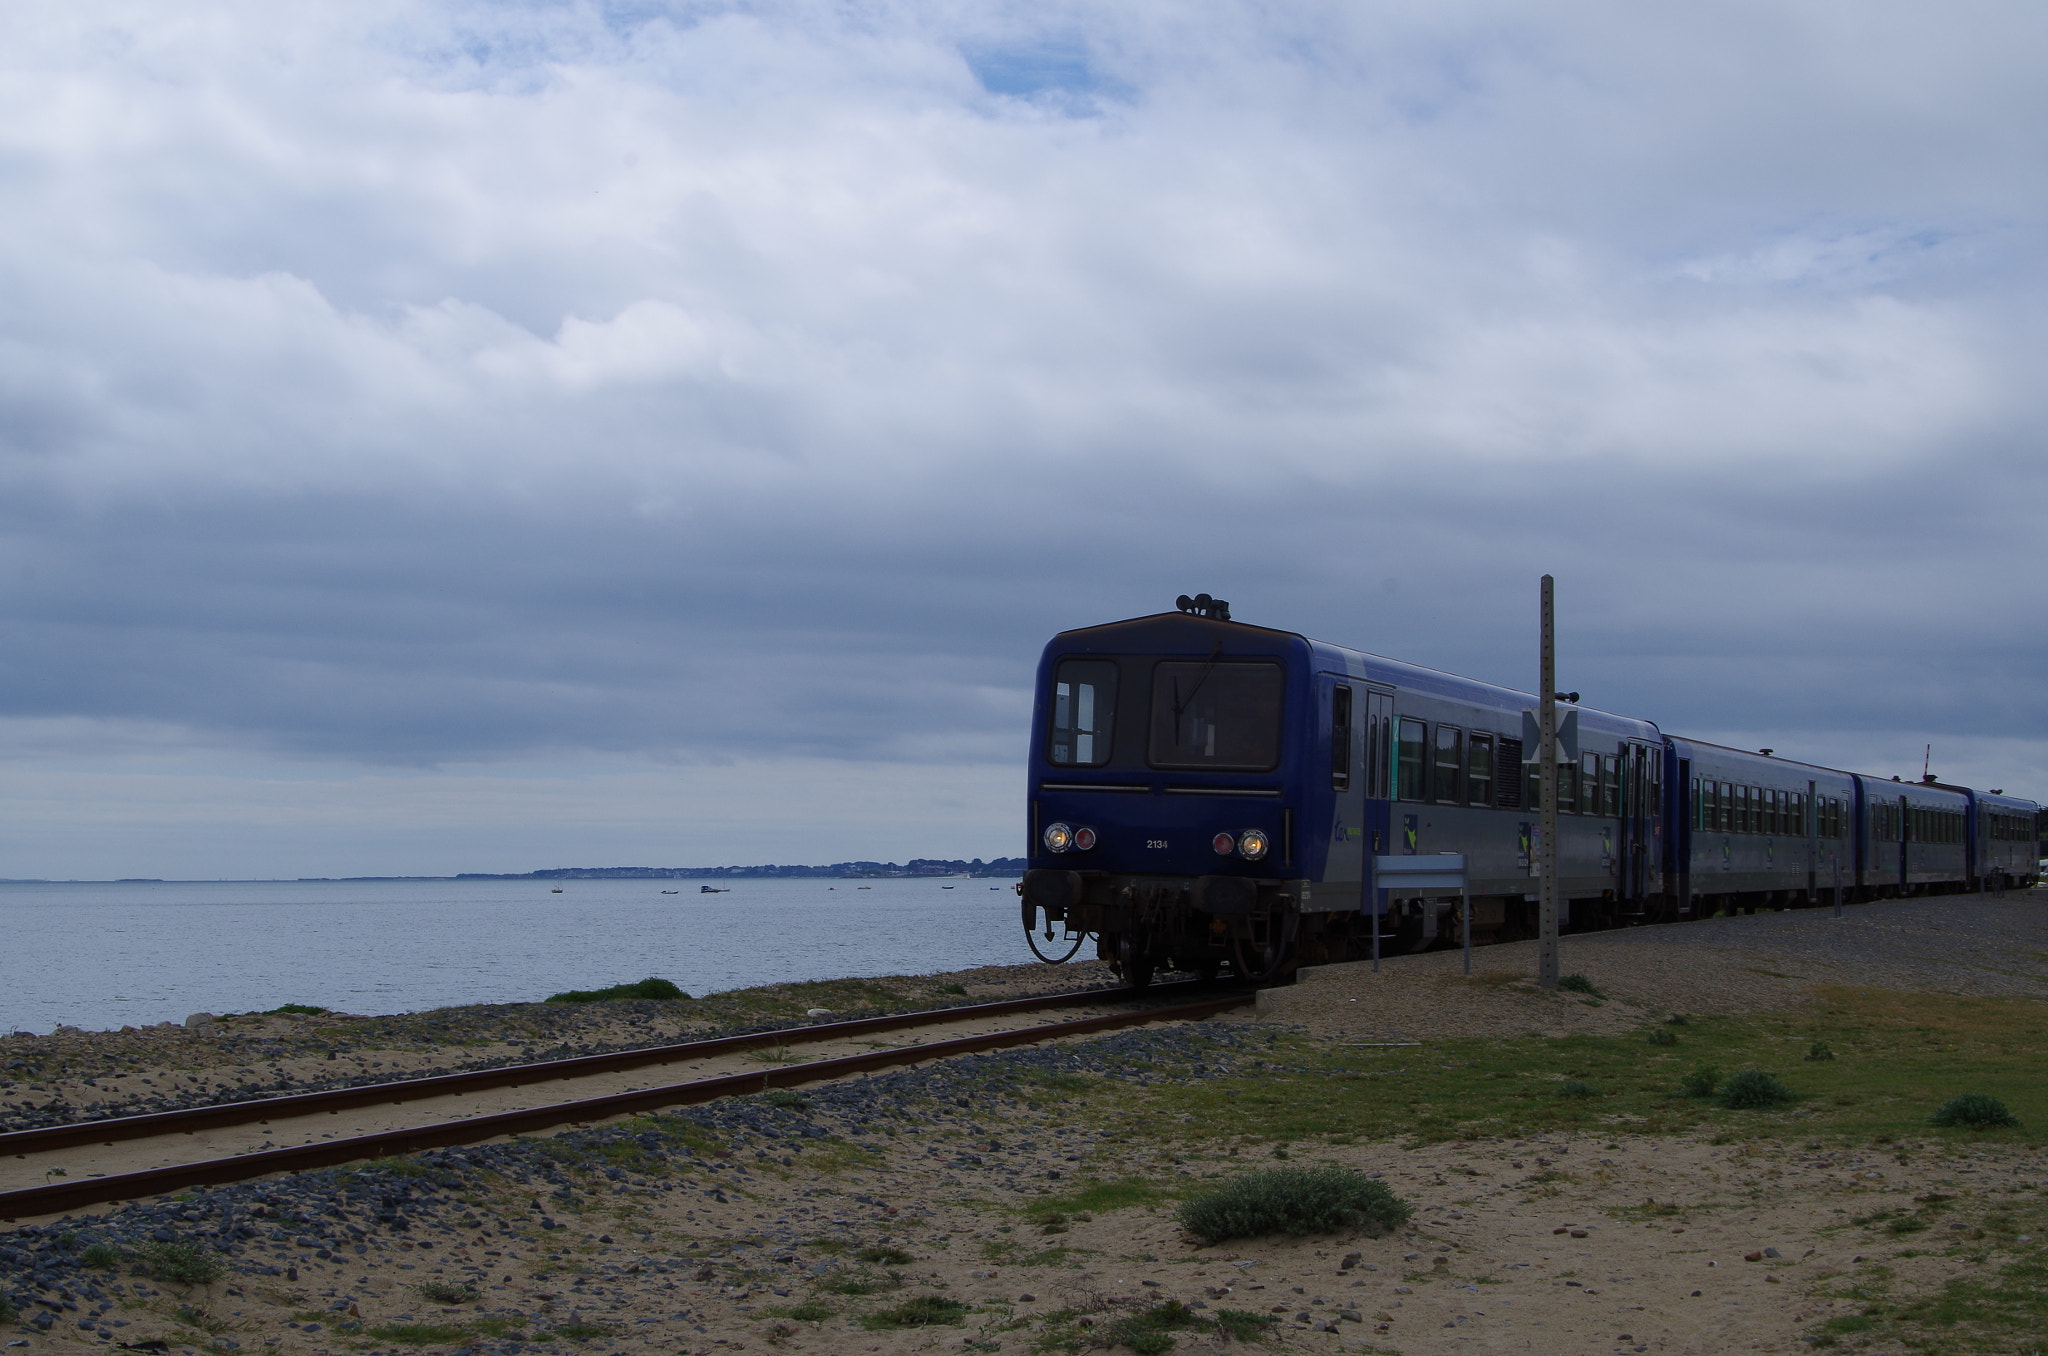 Pentax K-30 sample photo. Train from nowhere photography